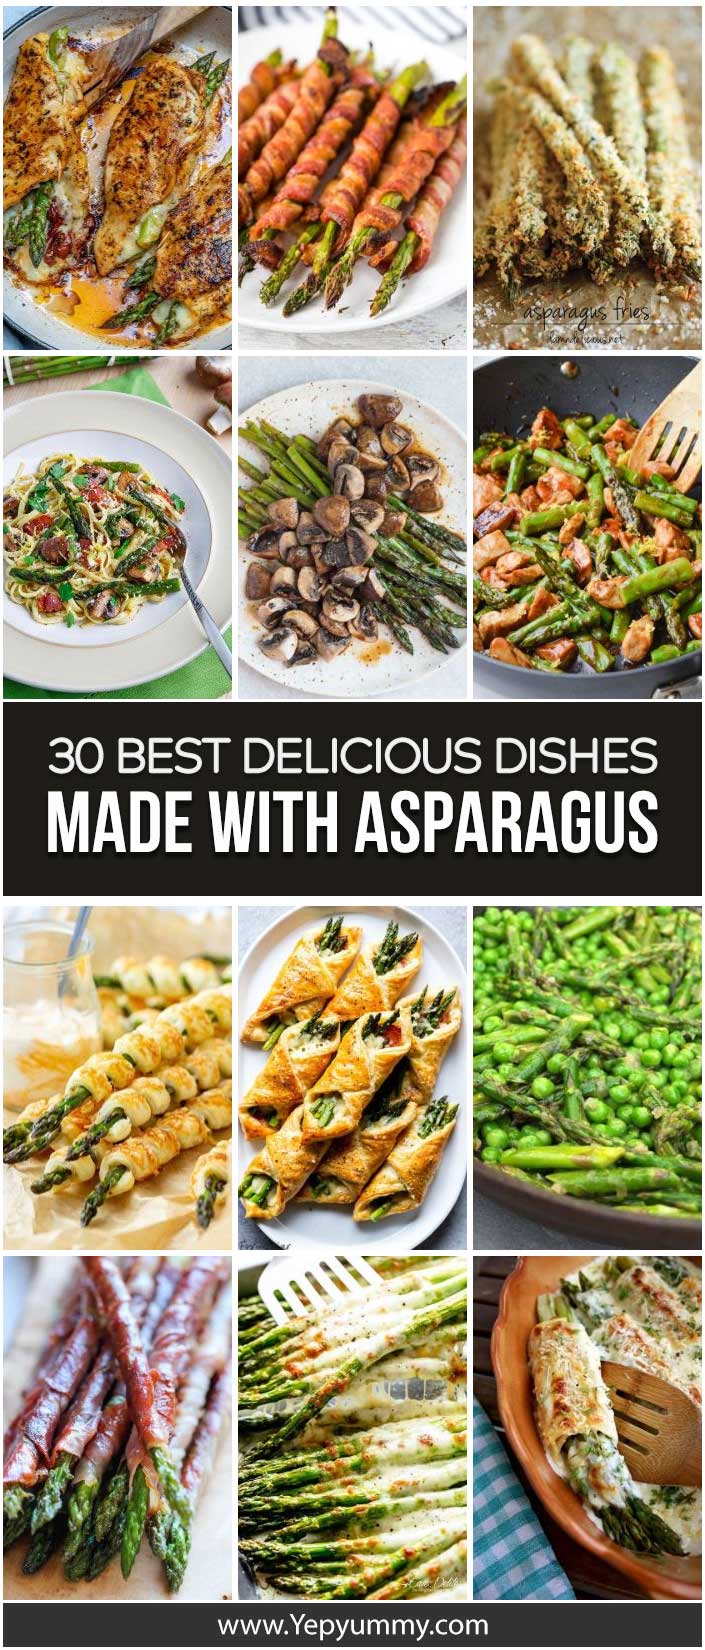 30 Best Delicious Dishes Made With Asparagus